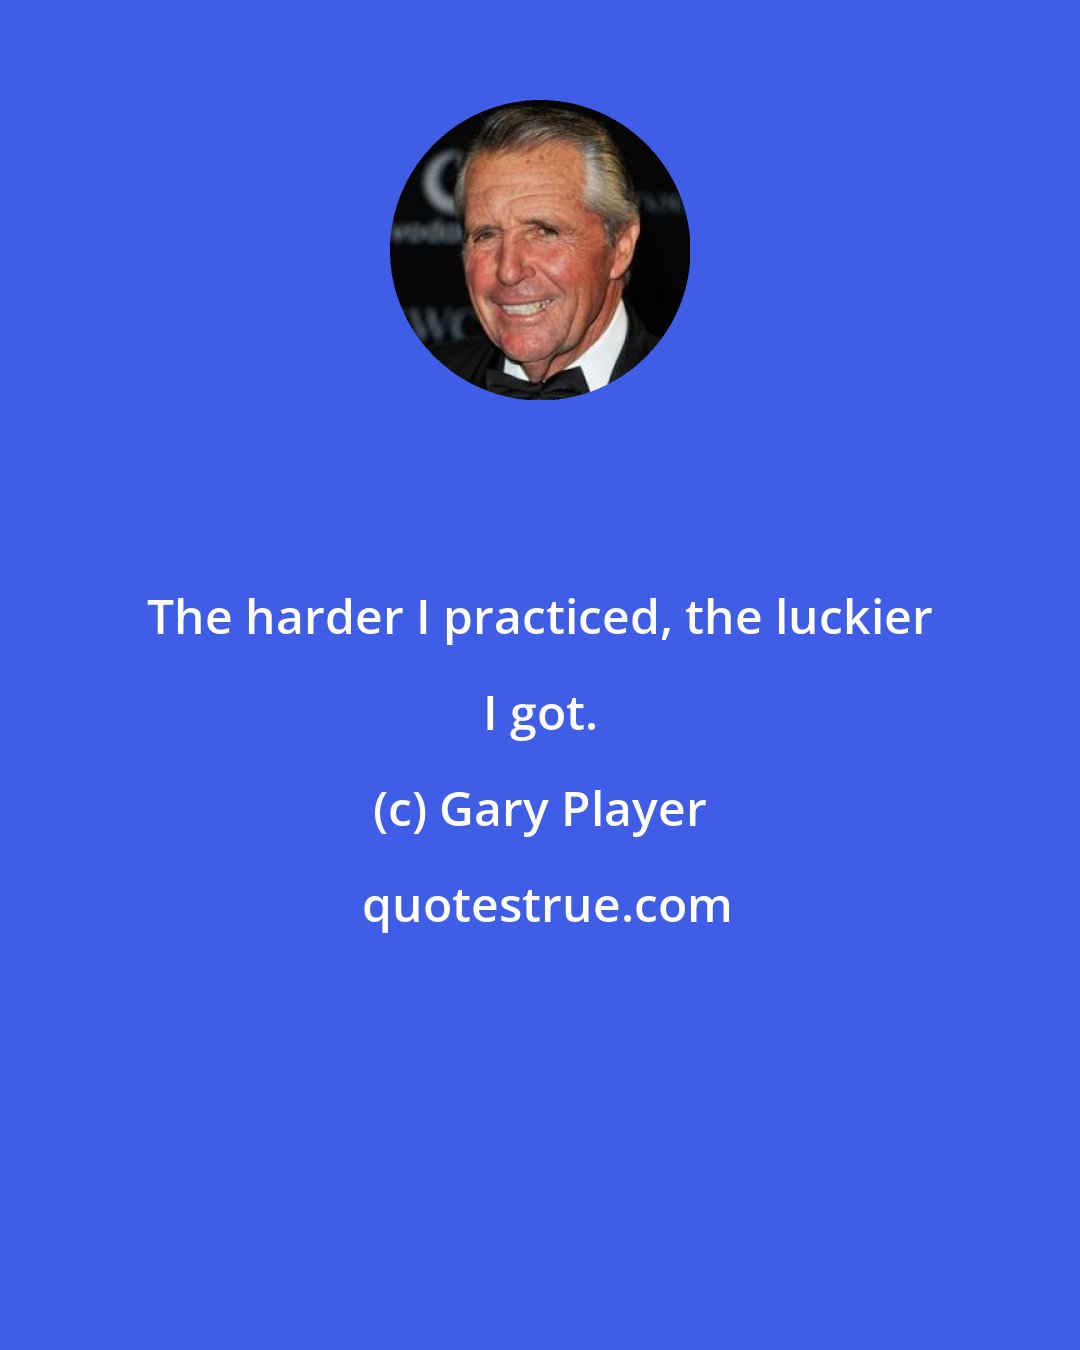 Gary Player: The harder I practiced, the luckier I got.